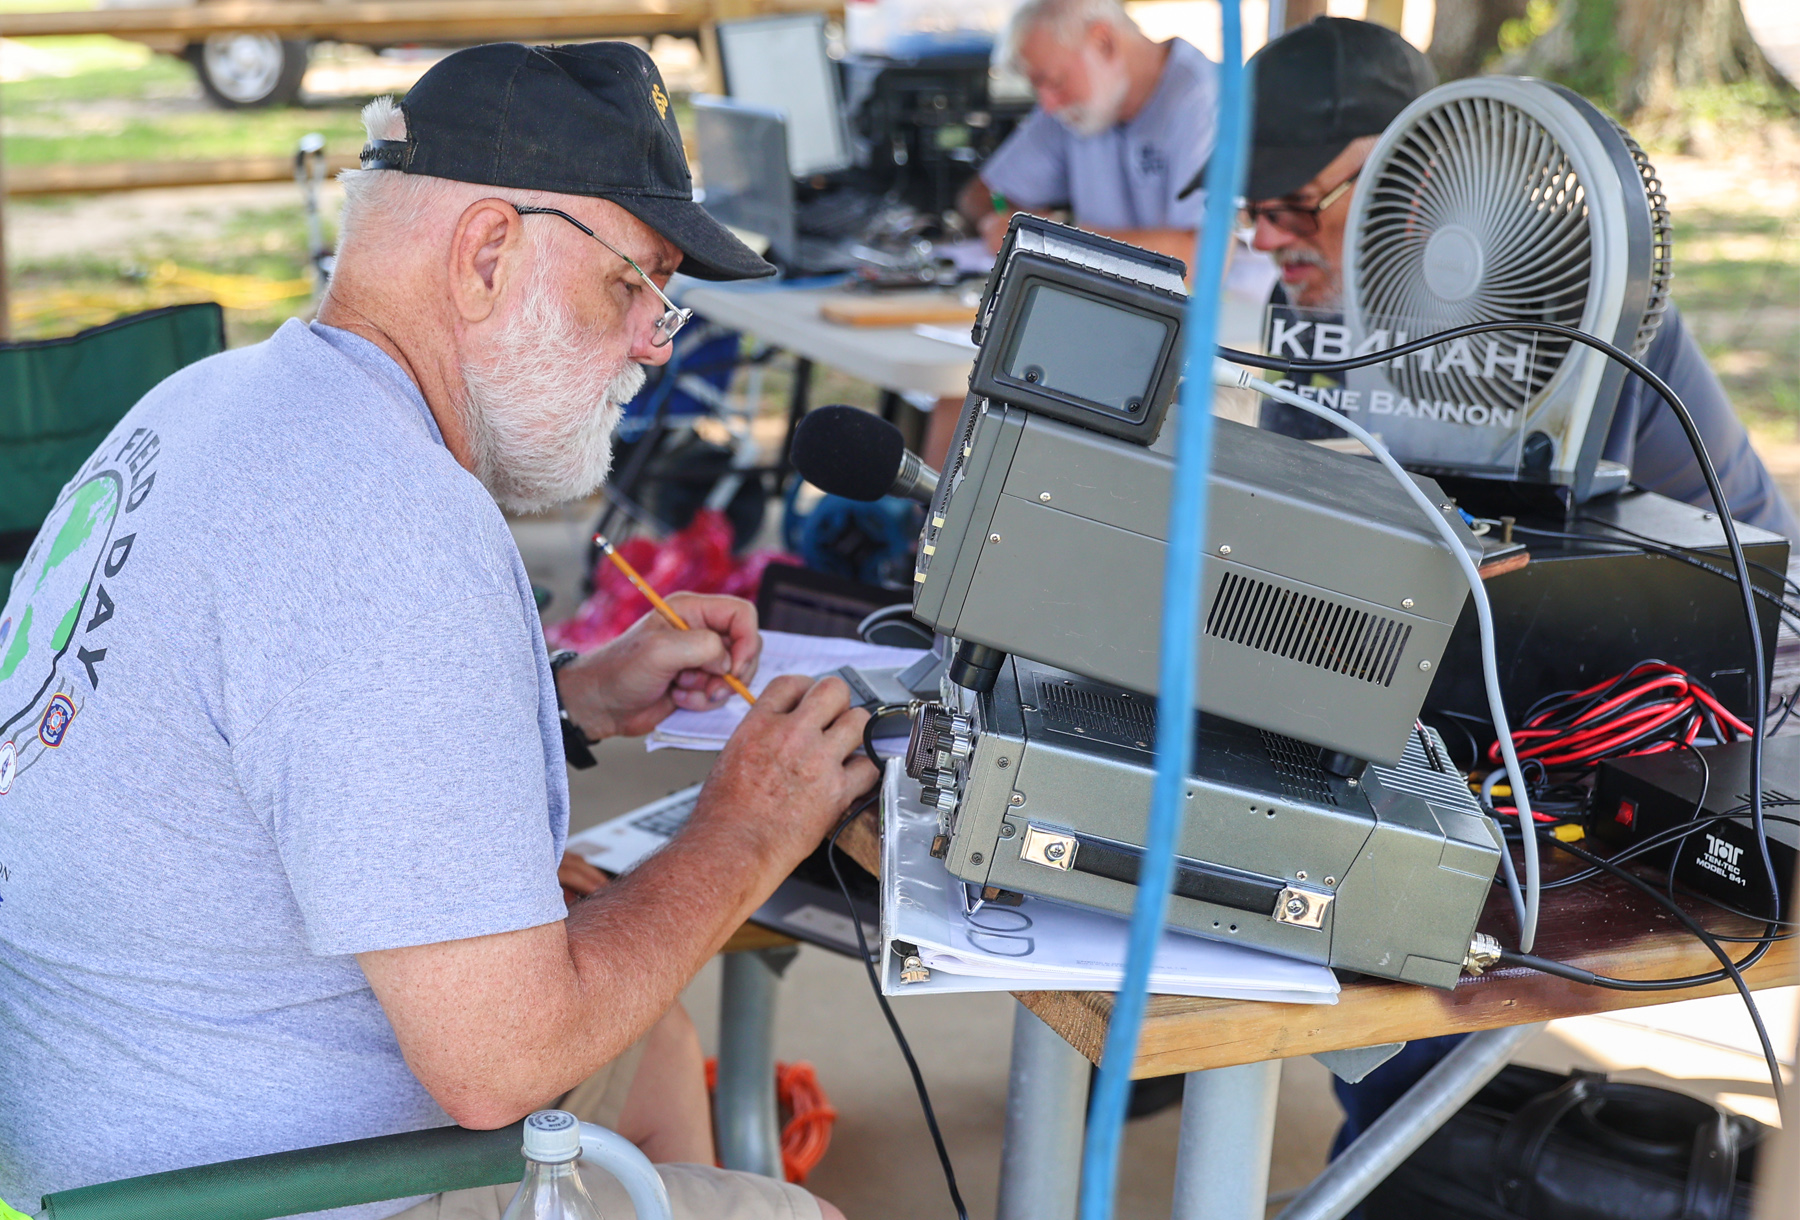 Local Hams Take To The Airwaves For Amateur Radio Field Day, Practicing Emergency Communications NorthEscambia